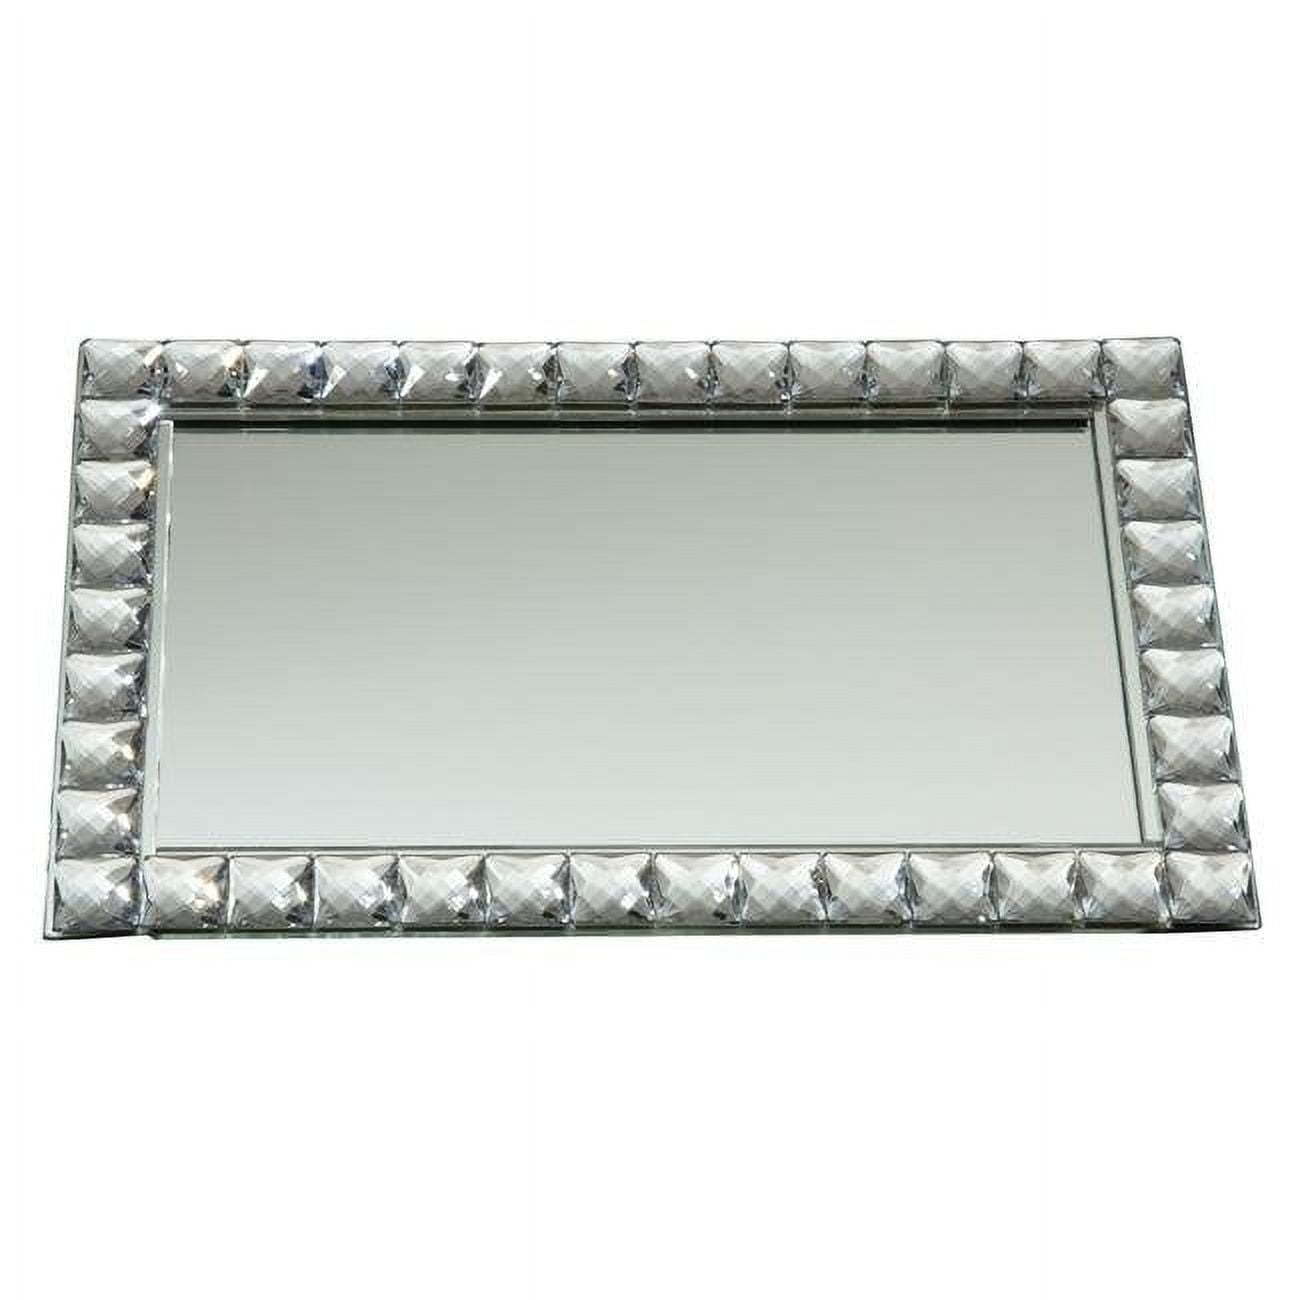 Picture of Jiallo 33212 9 x 14 in. Mirror Vanity Tray